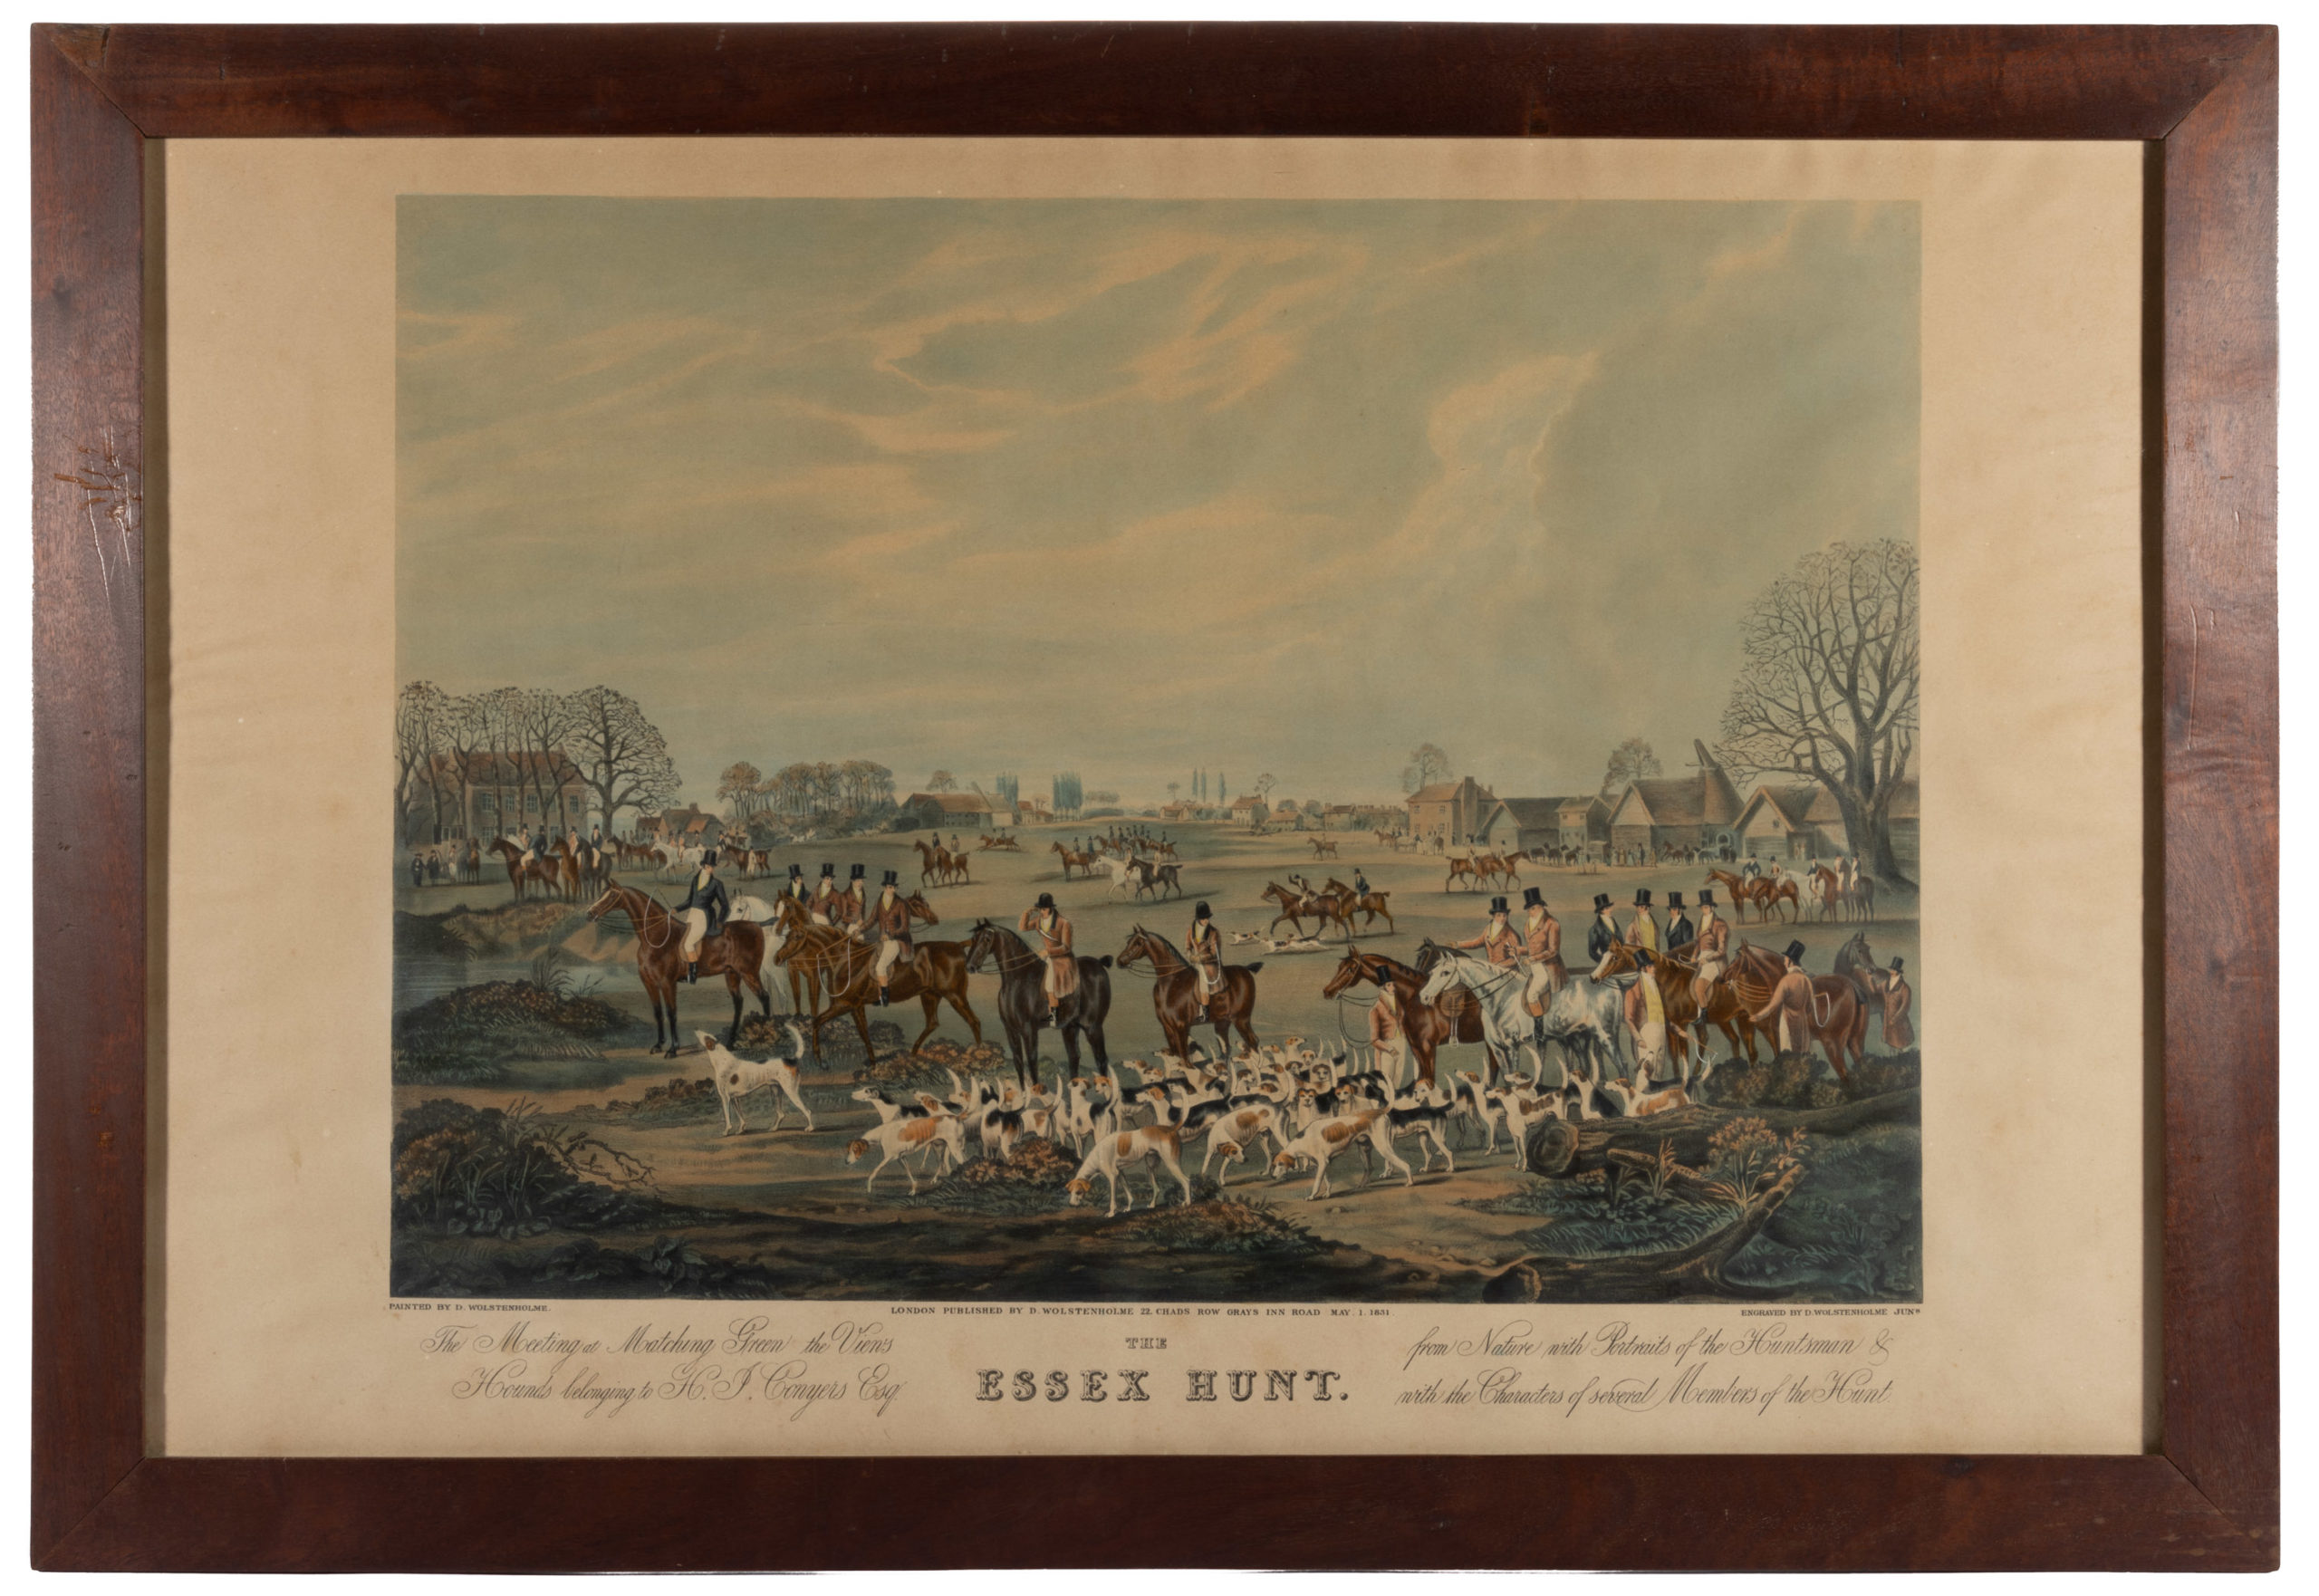 AFTER DEAN WOLSTENHOME (BRITISH, 1757-1837), “THE ESSEX HUNT” PRINTS, LOT OF FOUR,